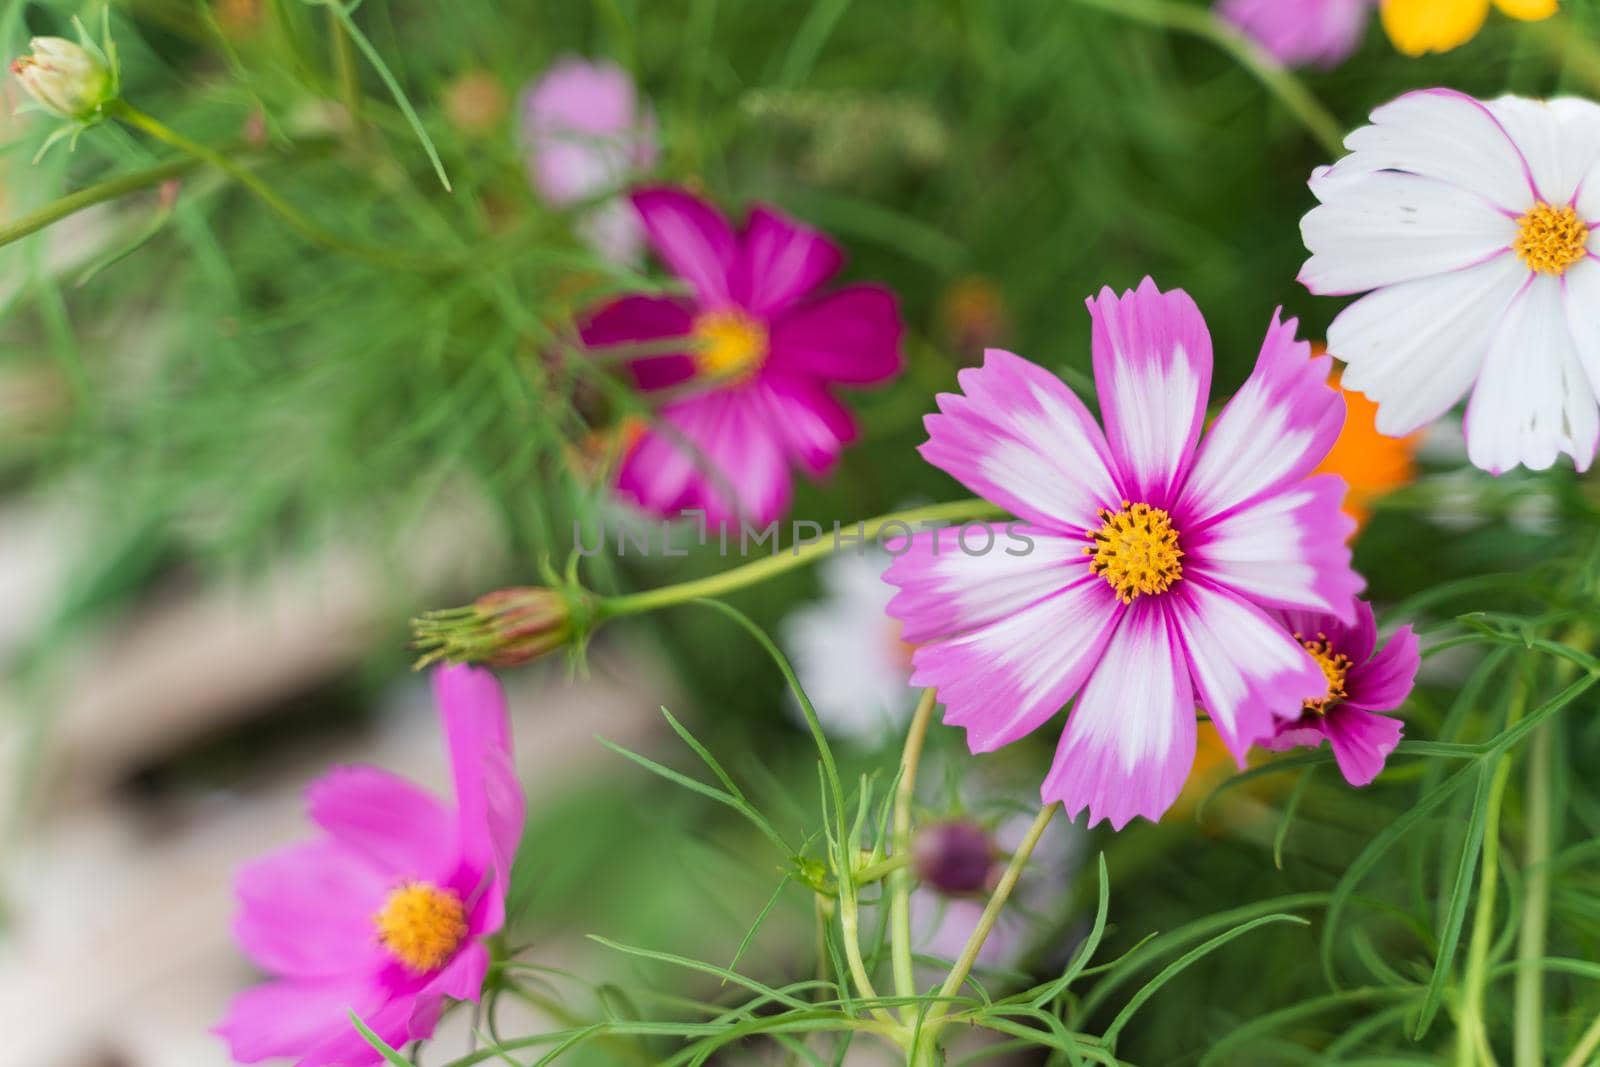 cosmos flowers in the flower garden, nature flowers concept